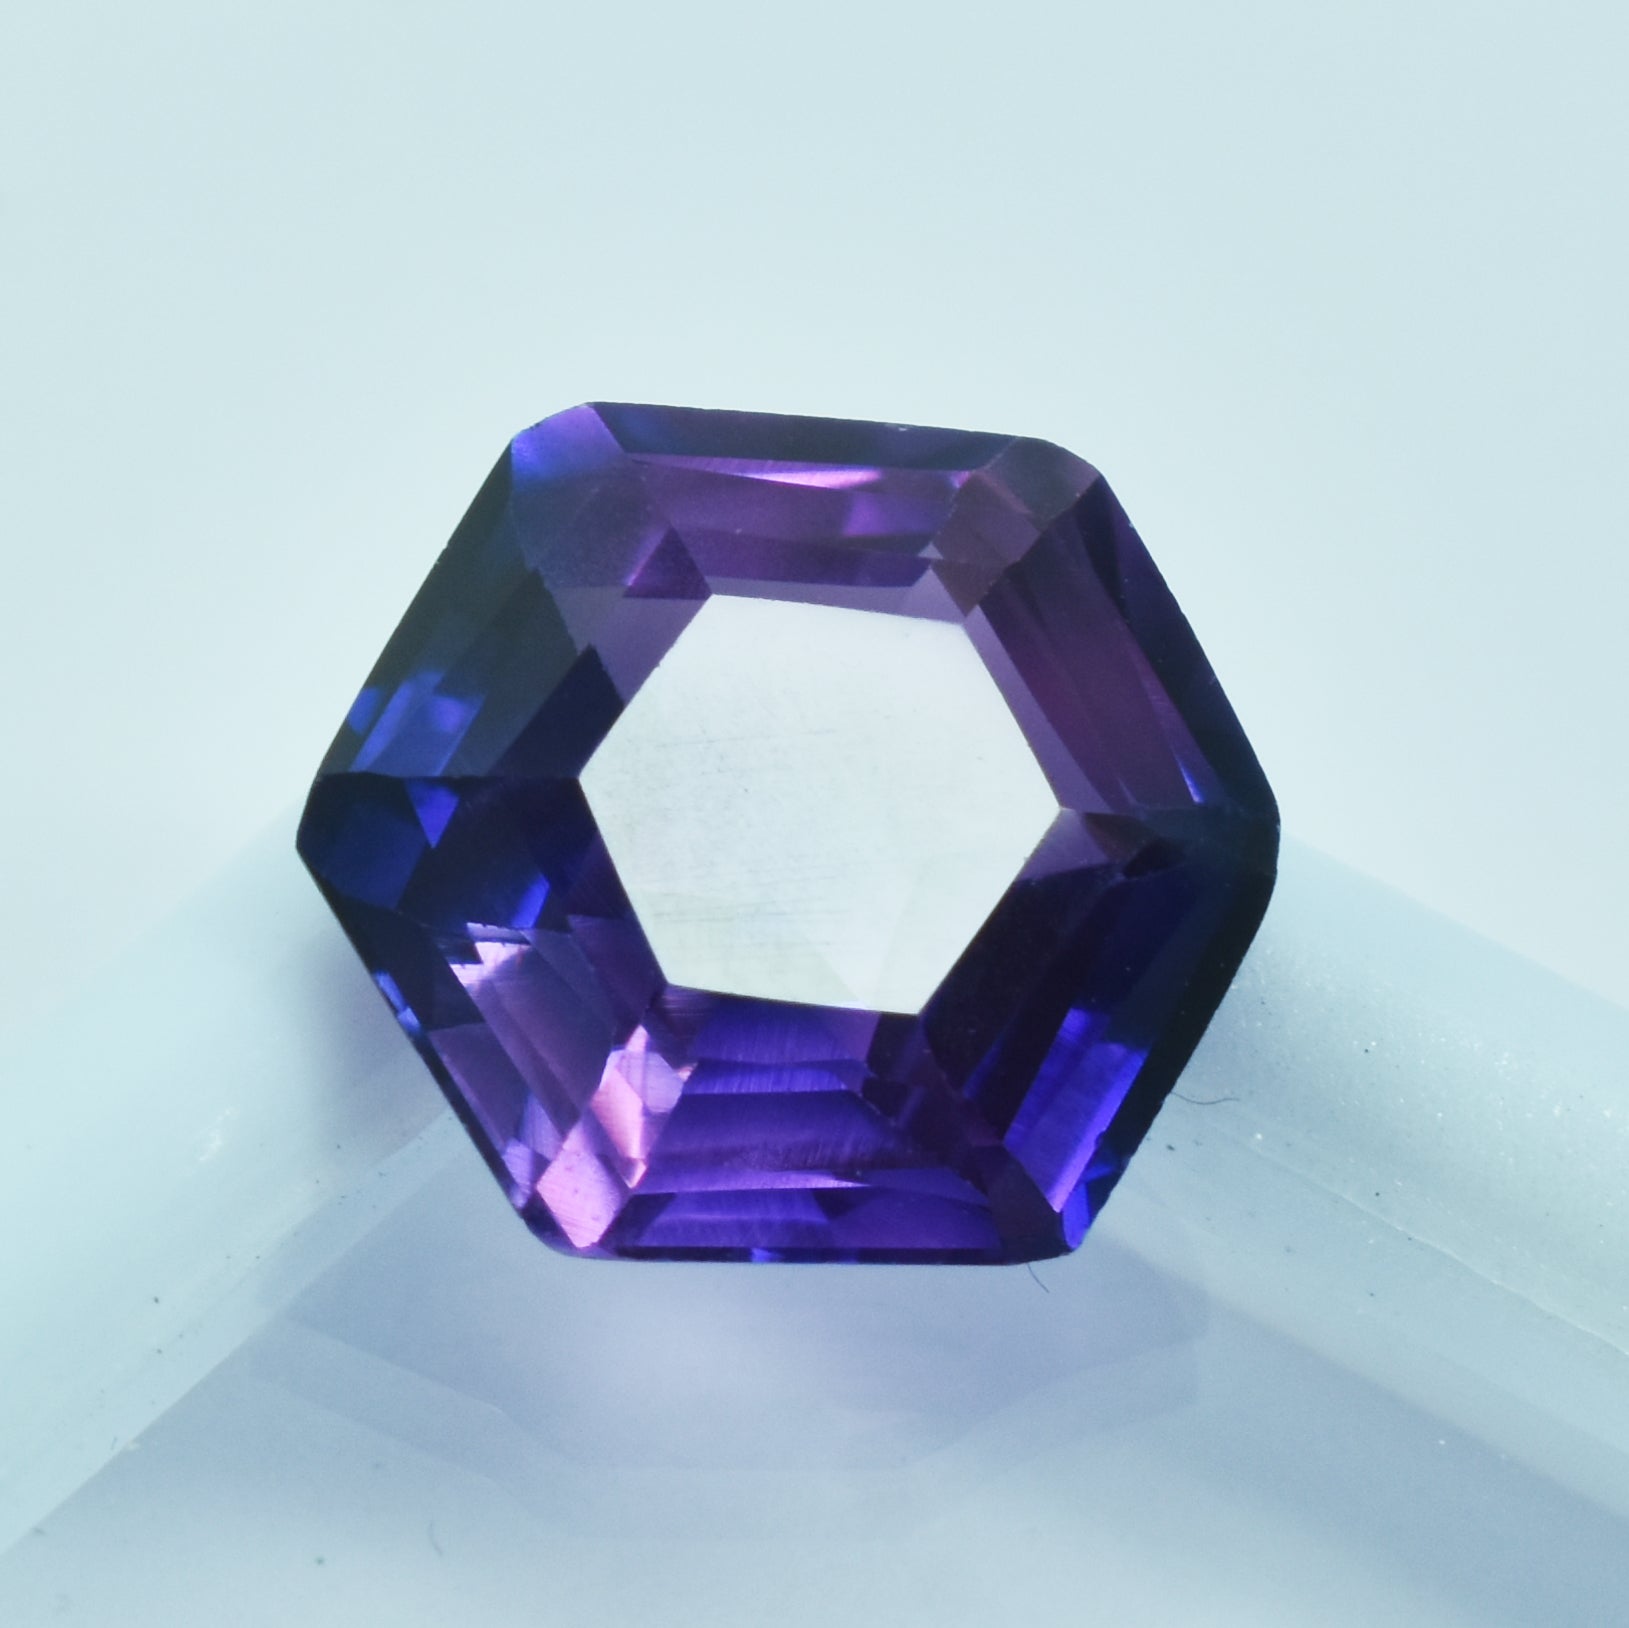 BRILLIANT OFFER !! Sapphire Beautiful Jewelry Natural 10.55 Carat Fancy Shape Purple Color Change Sapphire Certified Loose Gemstone ,September Sapphire Gem | FREE Delivery FREE Gift | Exclusive Offer